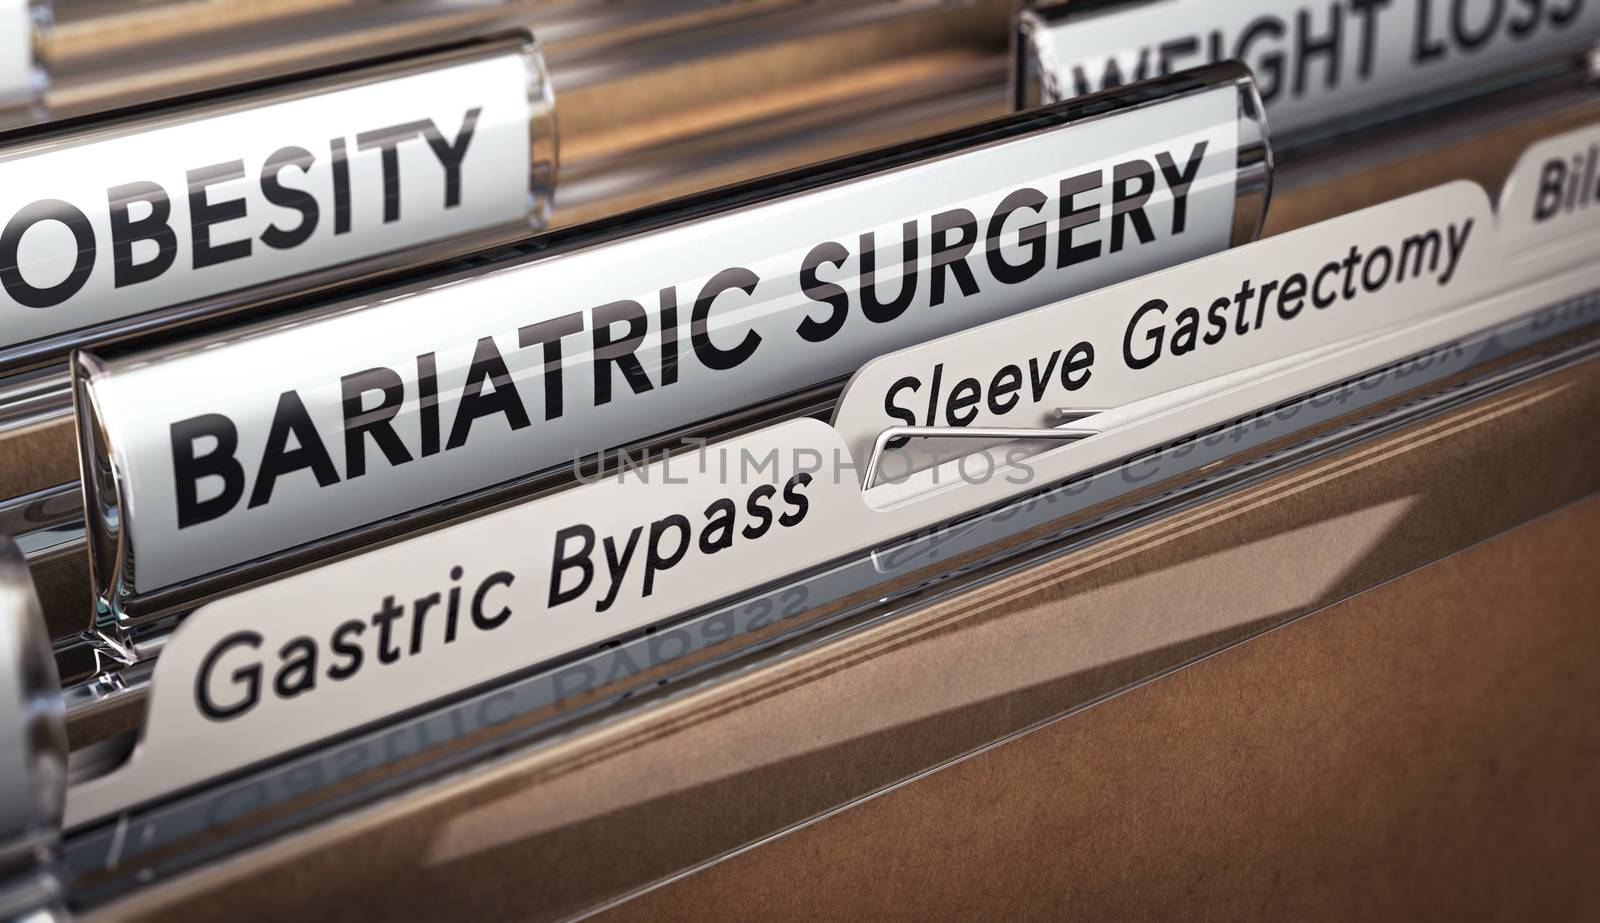 Bariatric Surgery Types, Gastric Bypass Or Sleeve Gastrectomy. by Olivier-Le-Moal